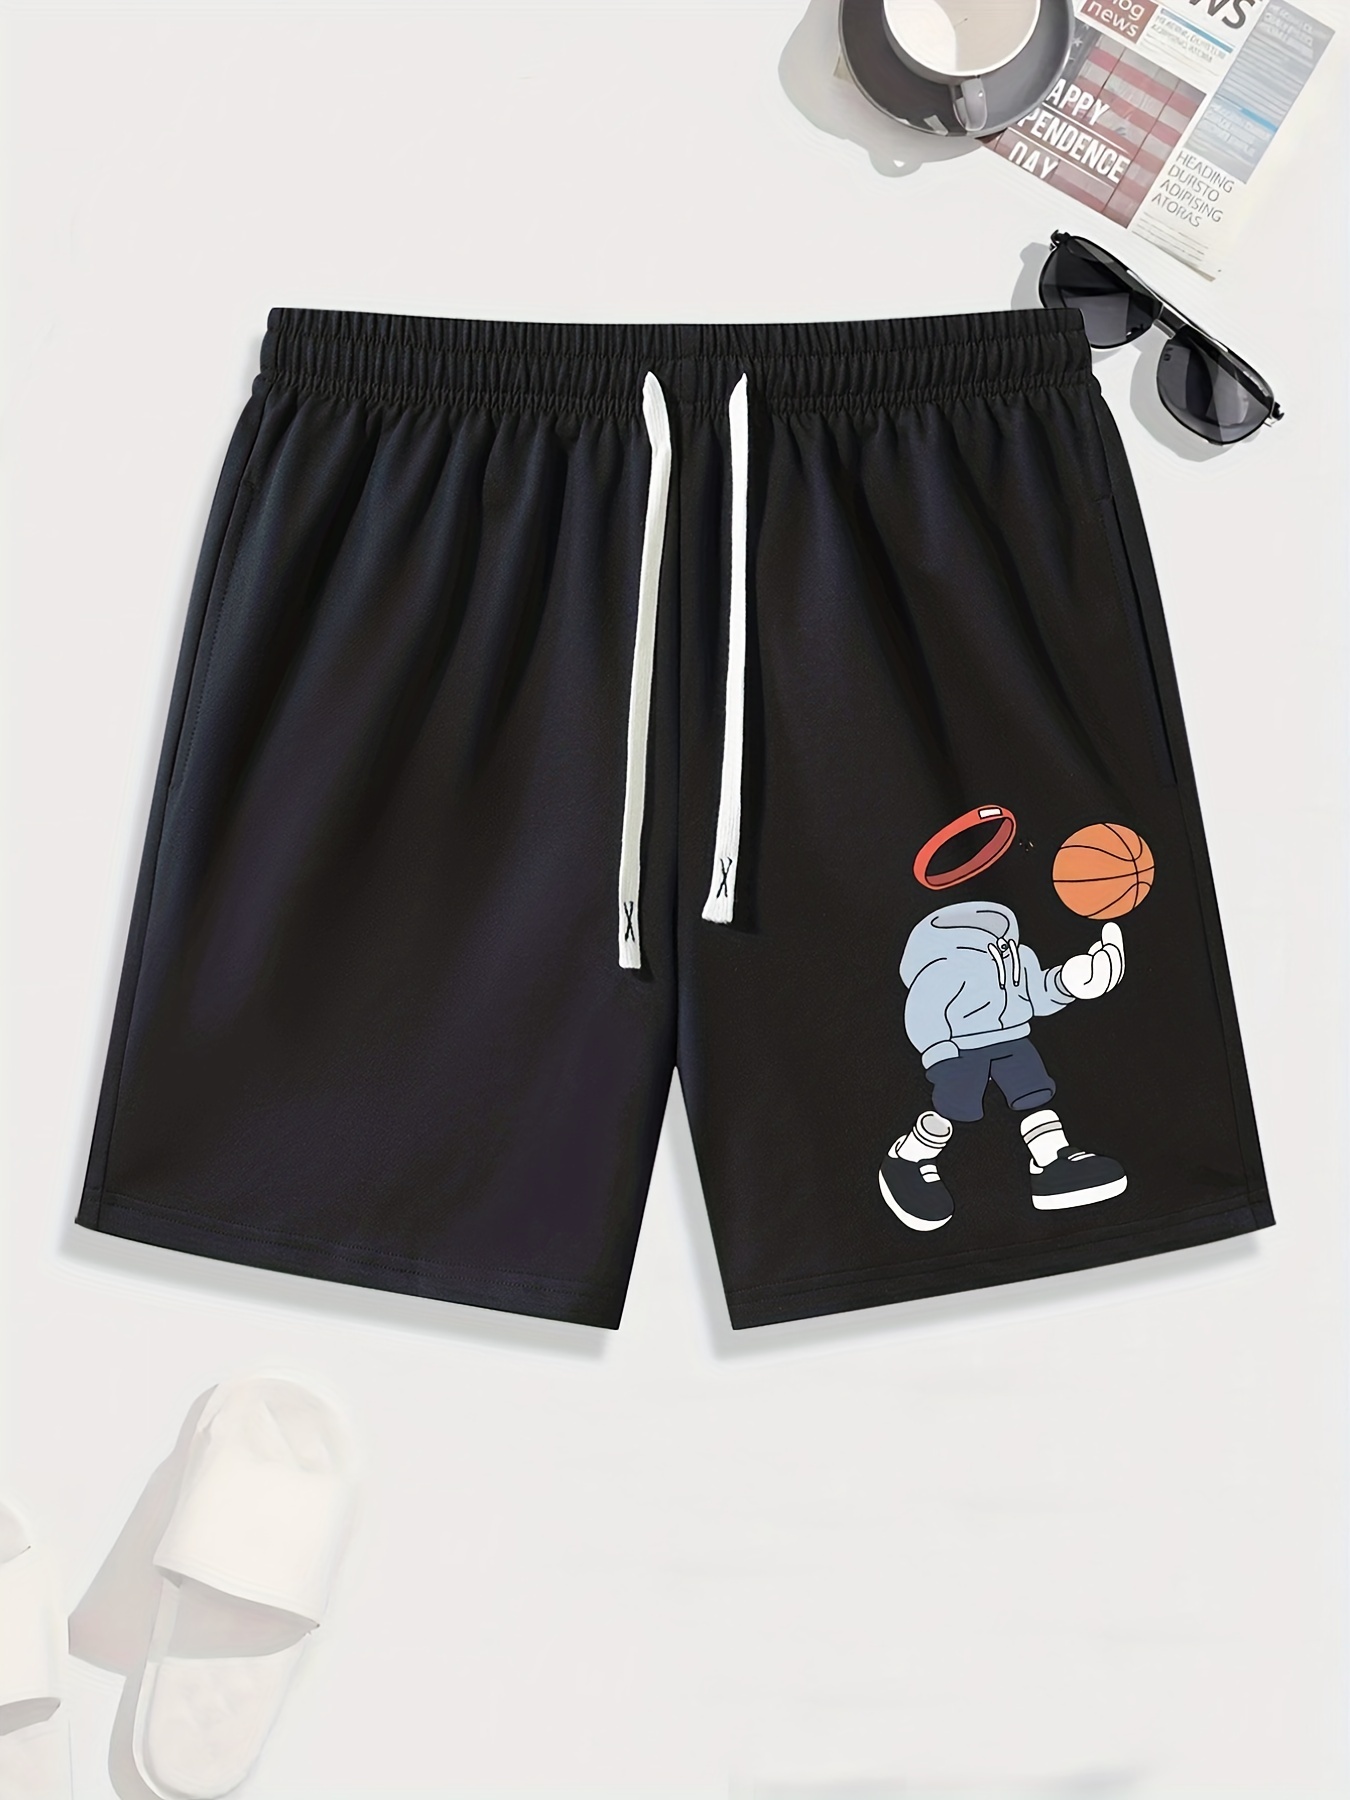 Retro Basketball Shorts now - Pure Athletic Streetwear